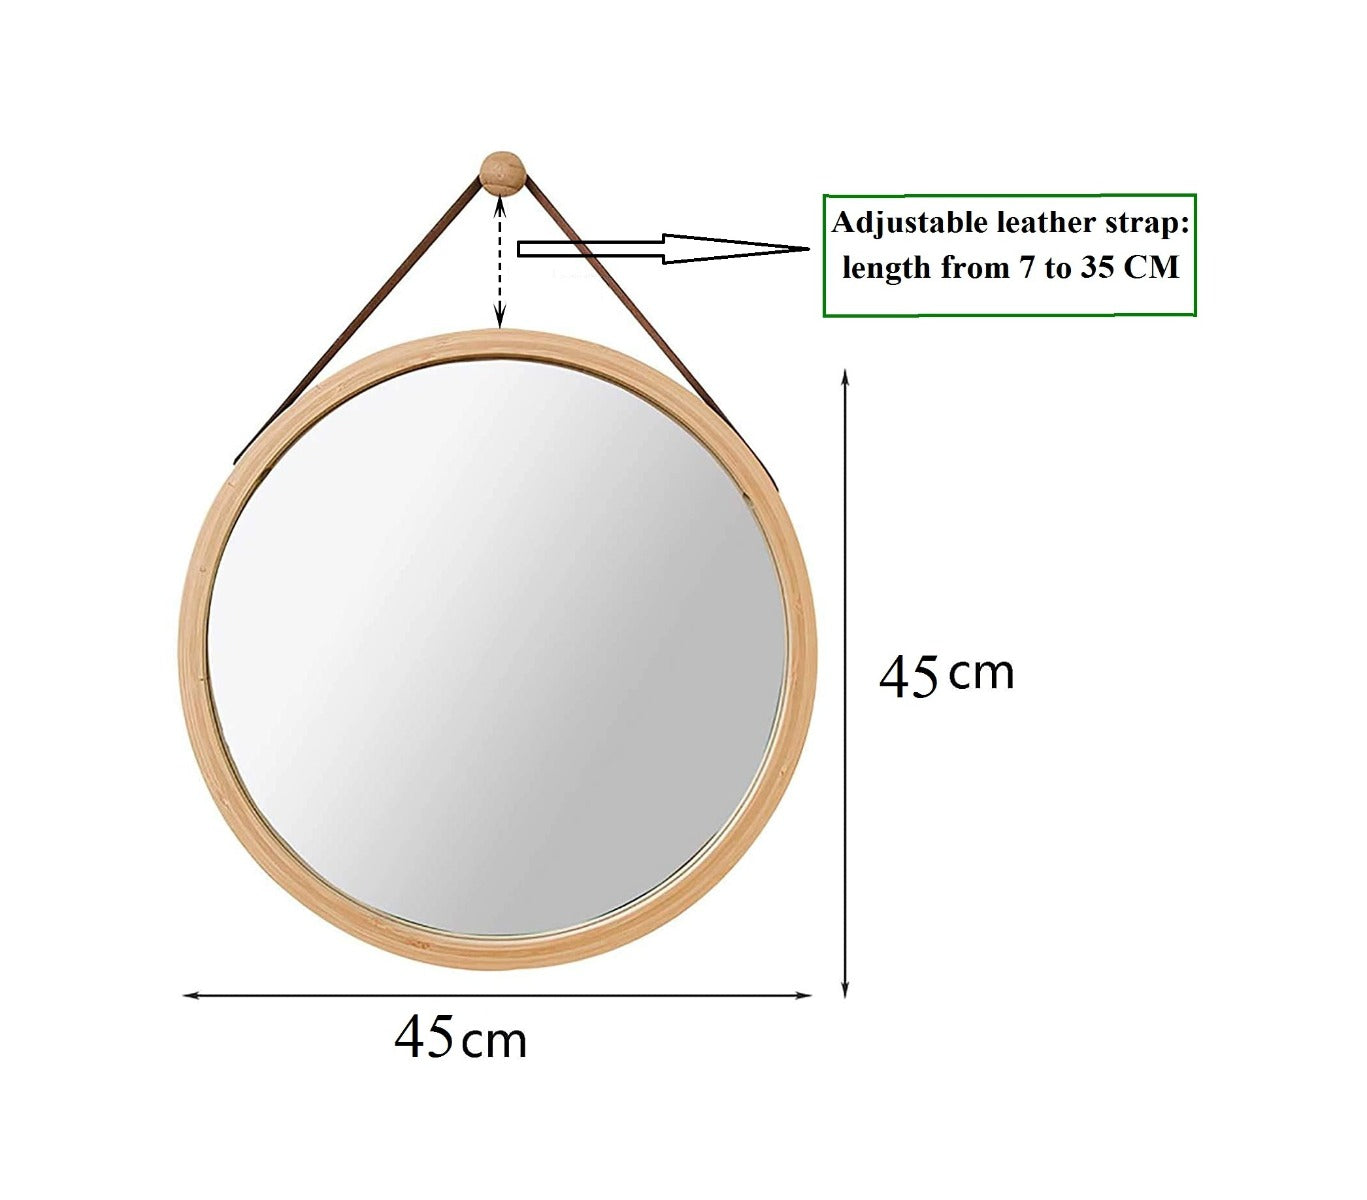 Hanging Round Wall Mirror 45 cm - Solid Bamboo Frame and Adjustable Leather Strap for Bathroom and Bedroom - AULASH